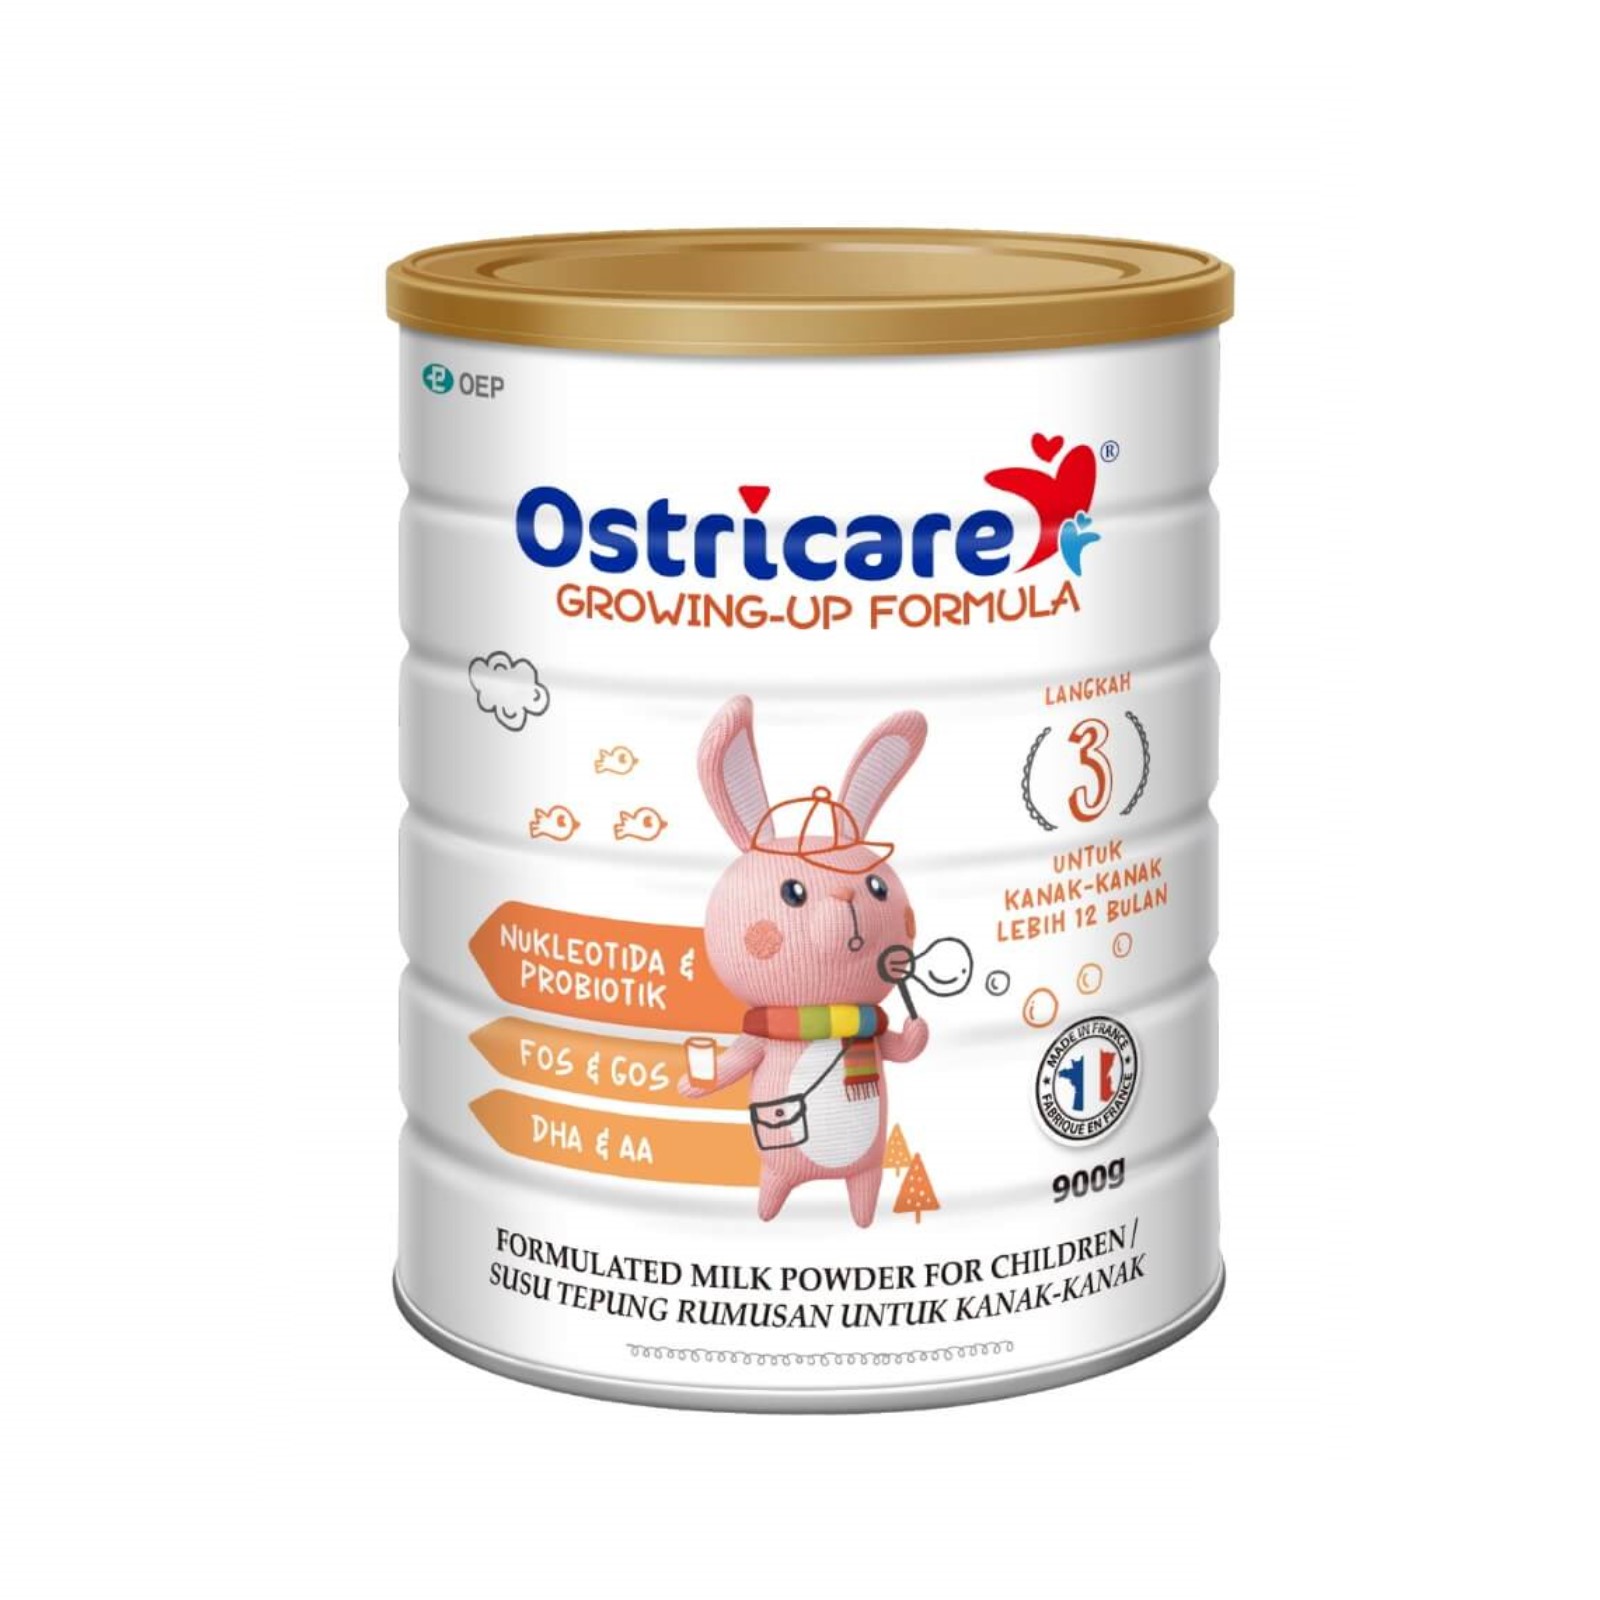 OSTRICARE S3 GROWING UP FORMULA 900G